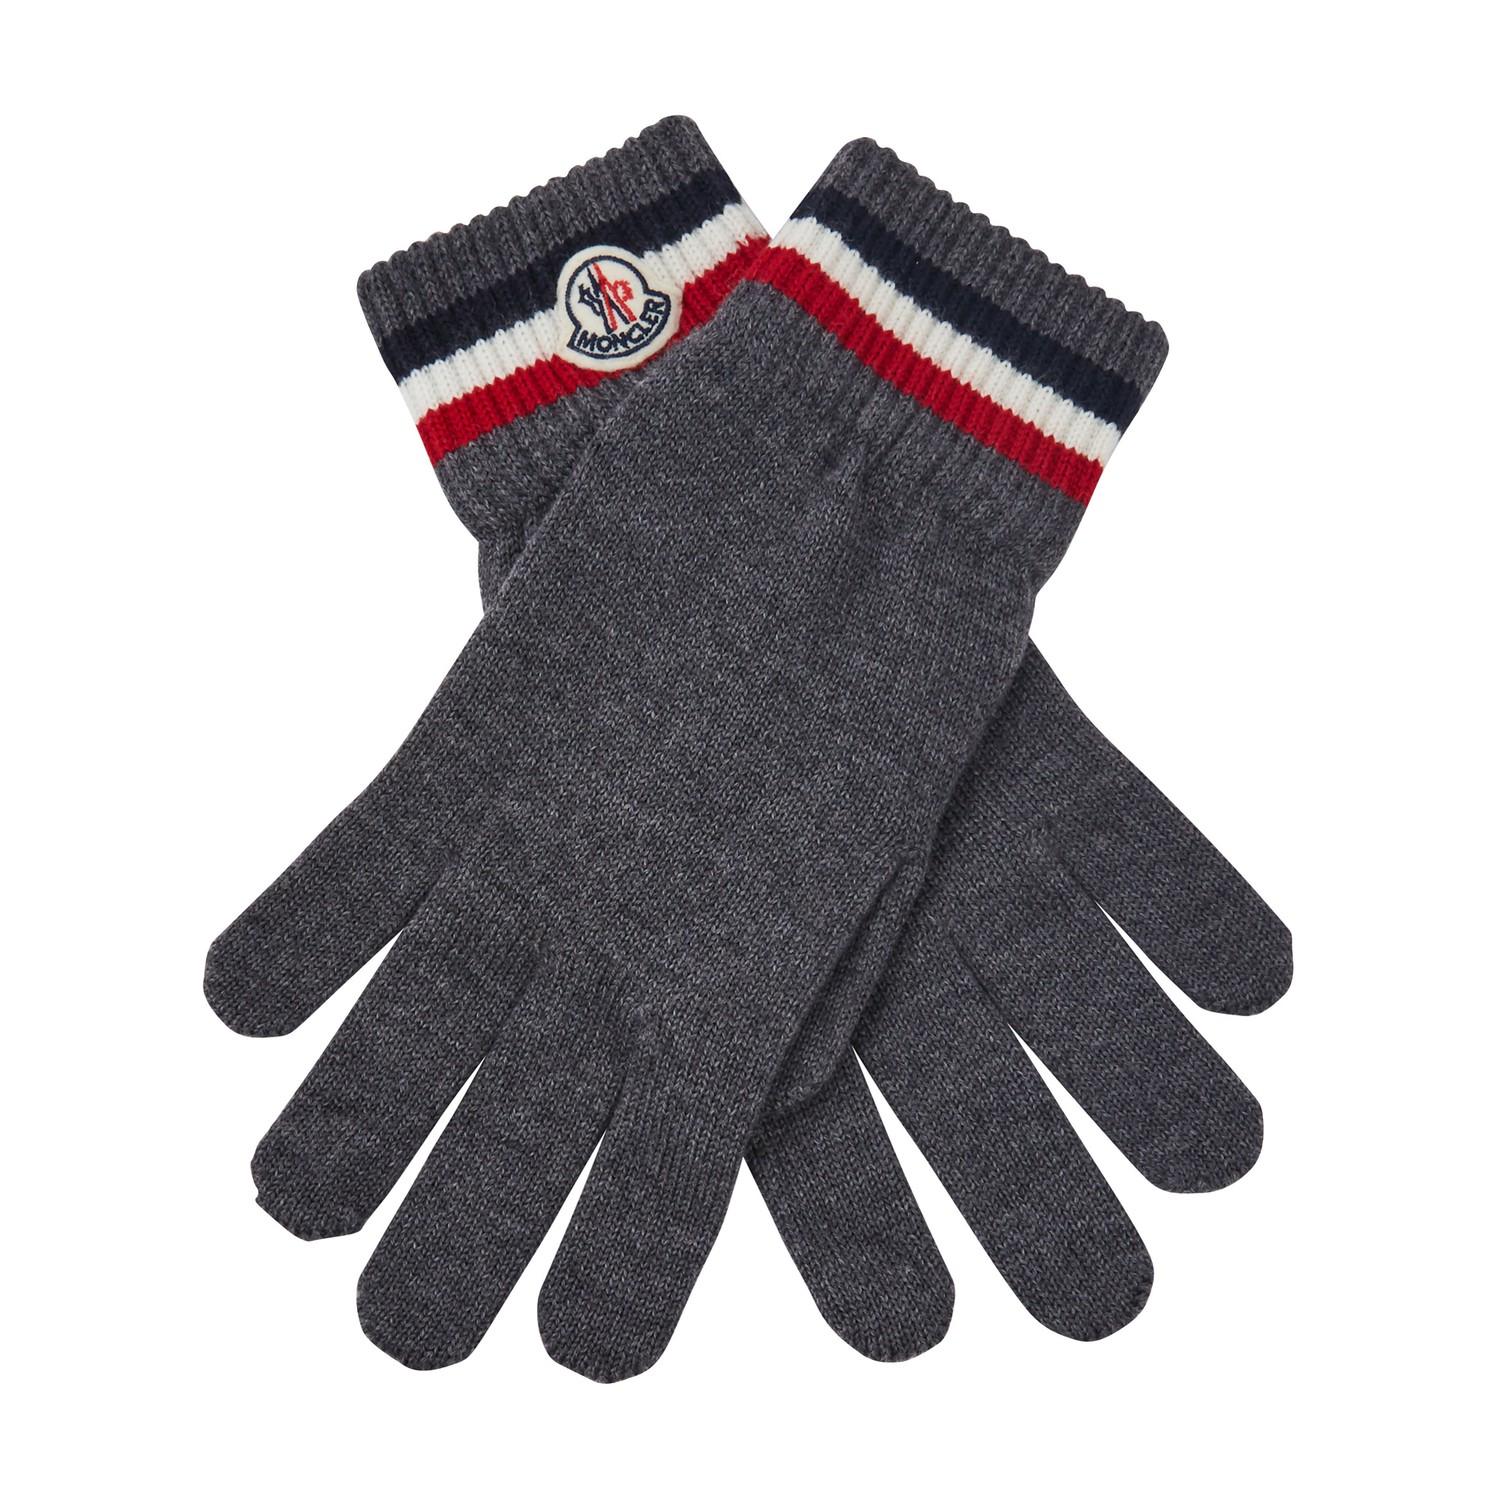 Moncler Wool Striped Logo Gloves in Charcoal (Gray) for Men - Lyst